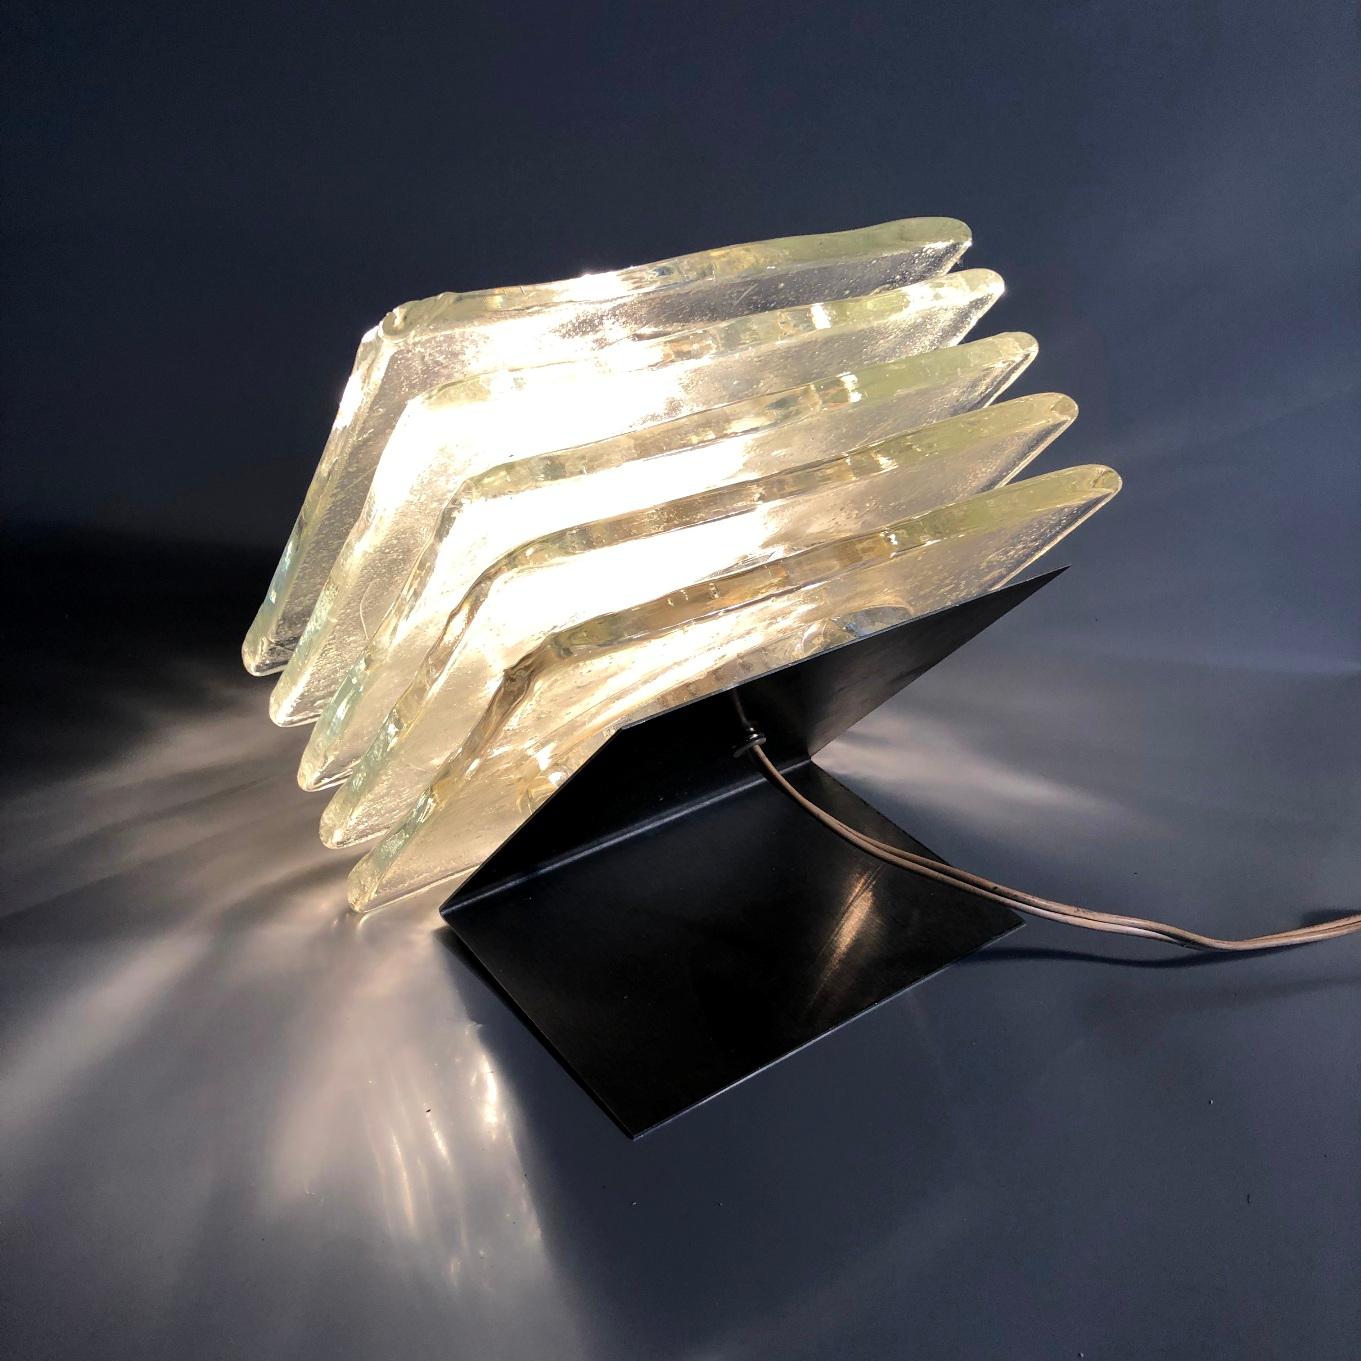 Spaceage Layered Murano Glass Sheets Cube Table Light, Italy, 1970s For Sale 1